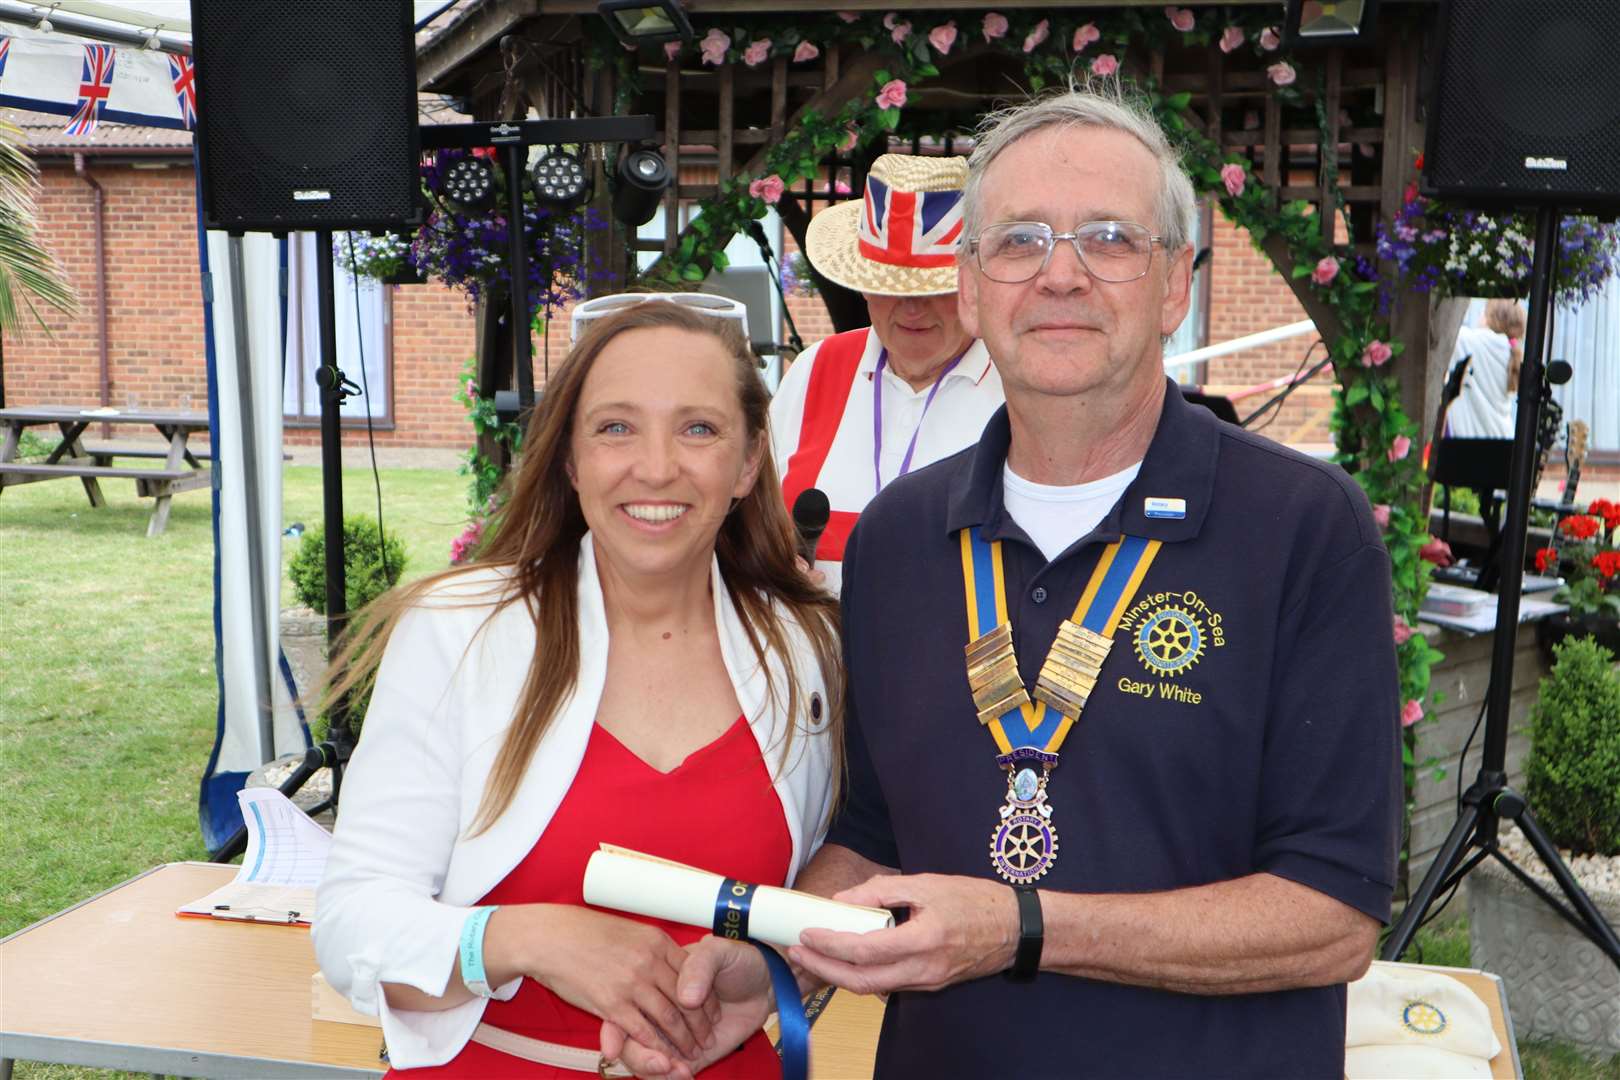 Becki Breiner of the Sheppey Song Signing Choir with Rotary president Gary White